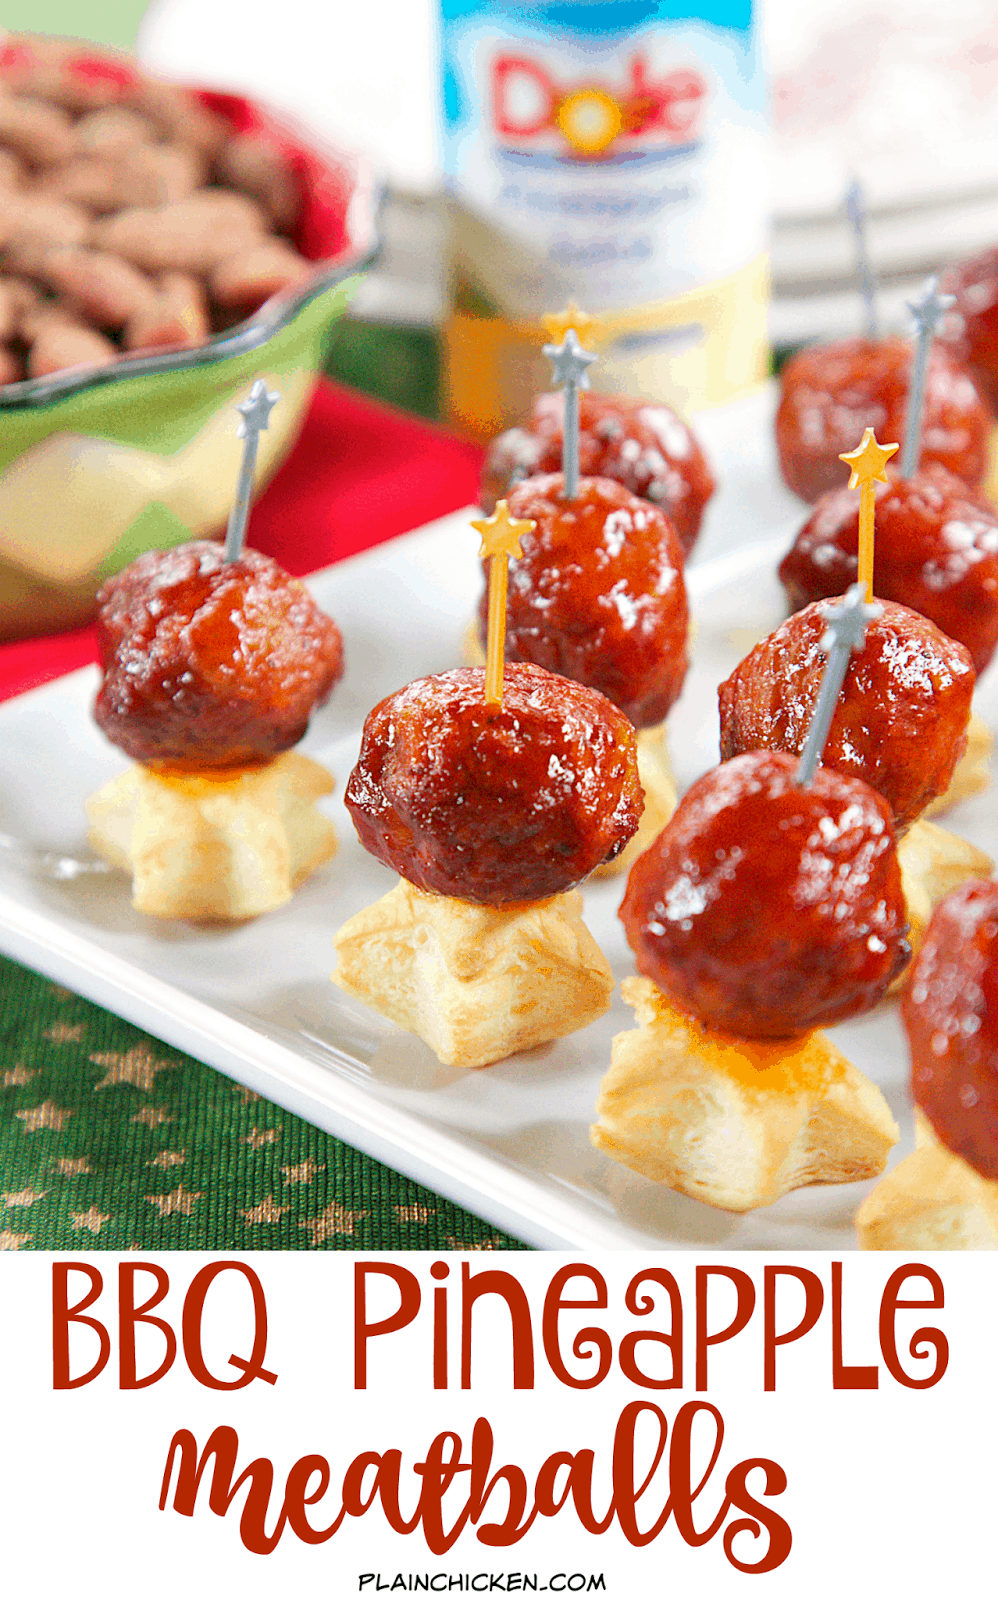 BBQ Pineapple Meatballs - only 3 ingredients! Serve on top of cut out puff pastry for a festive holiday appetizer. Can make on the stove-top or slow cooker. 